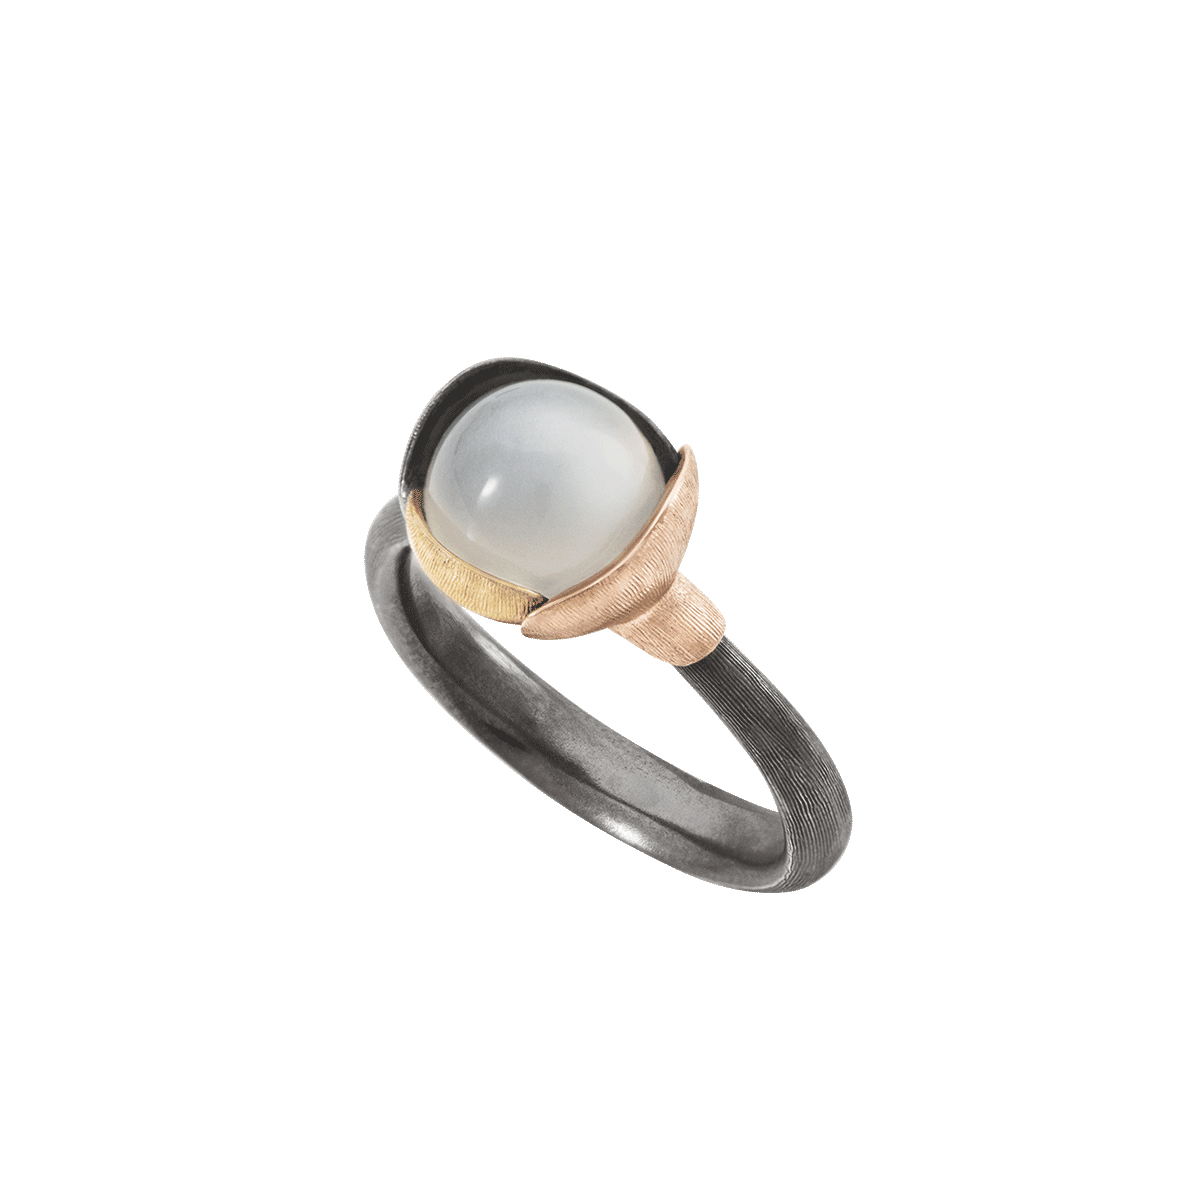 Moonstone PNG Photos